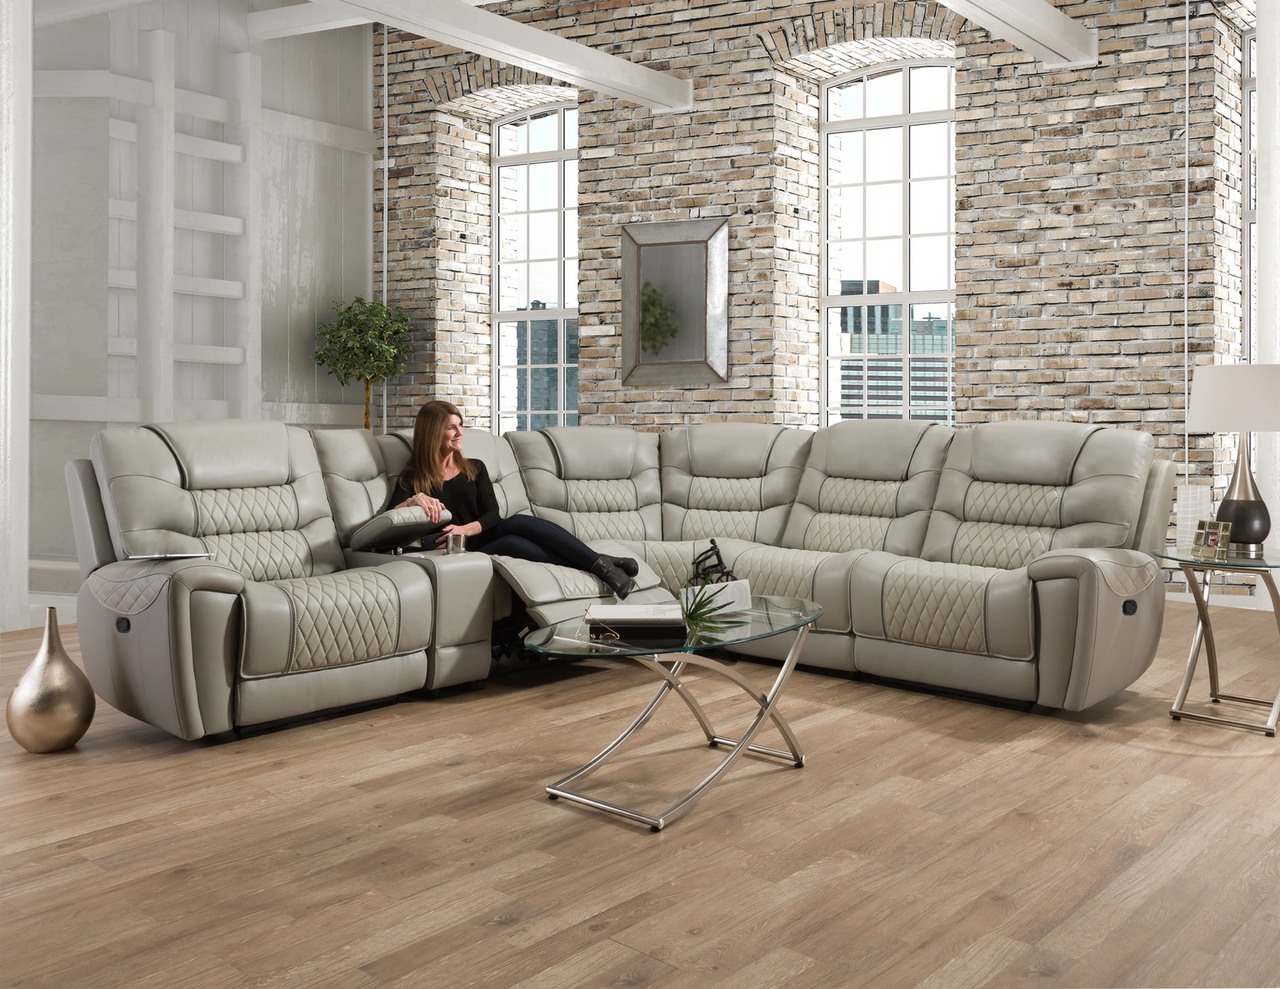 98815 3-Piece Reclining Sectional - Gray and Cream Color $2059.99